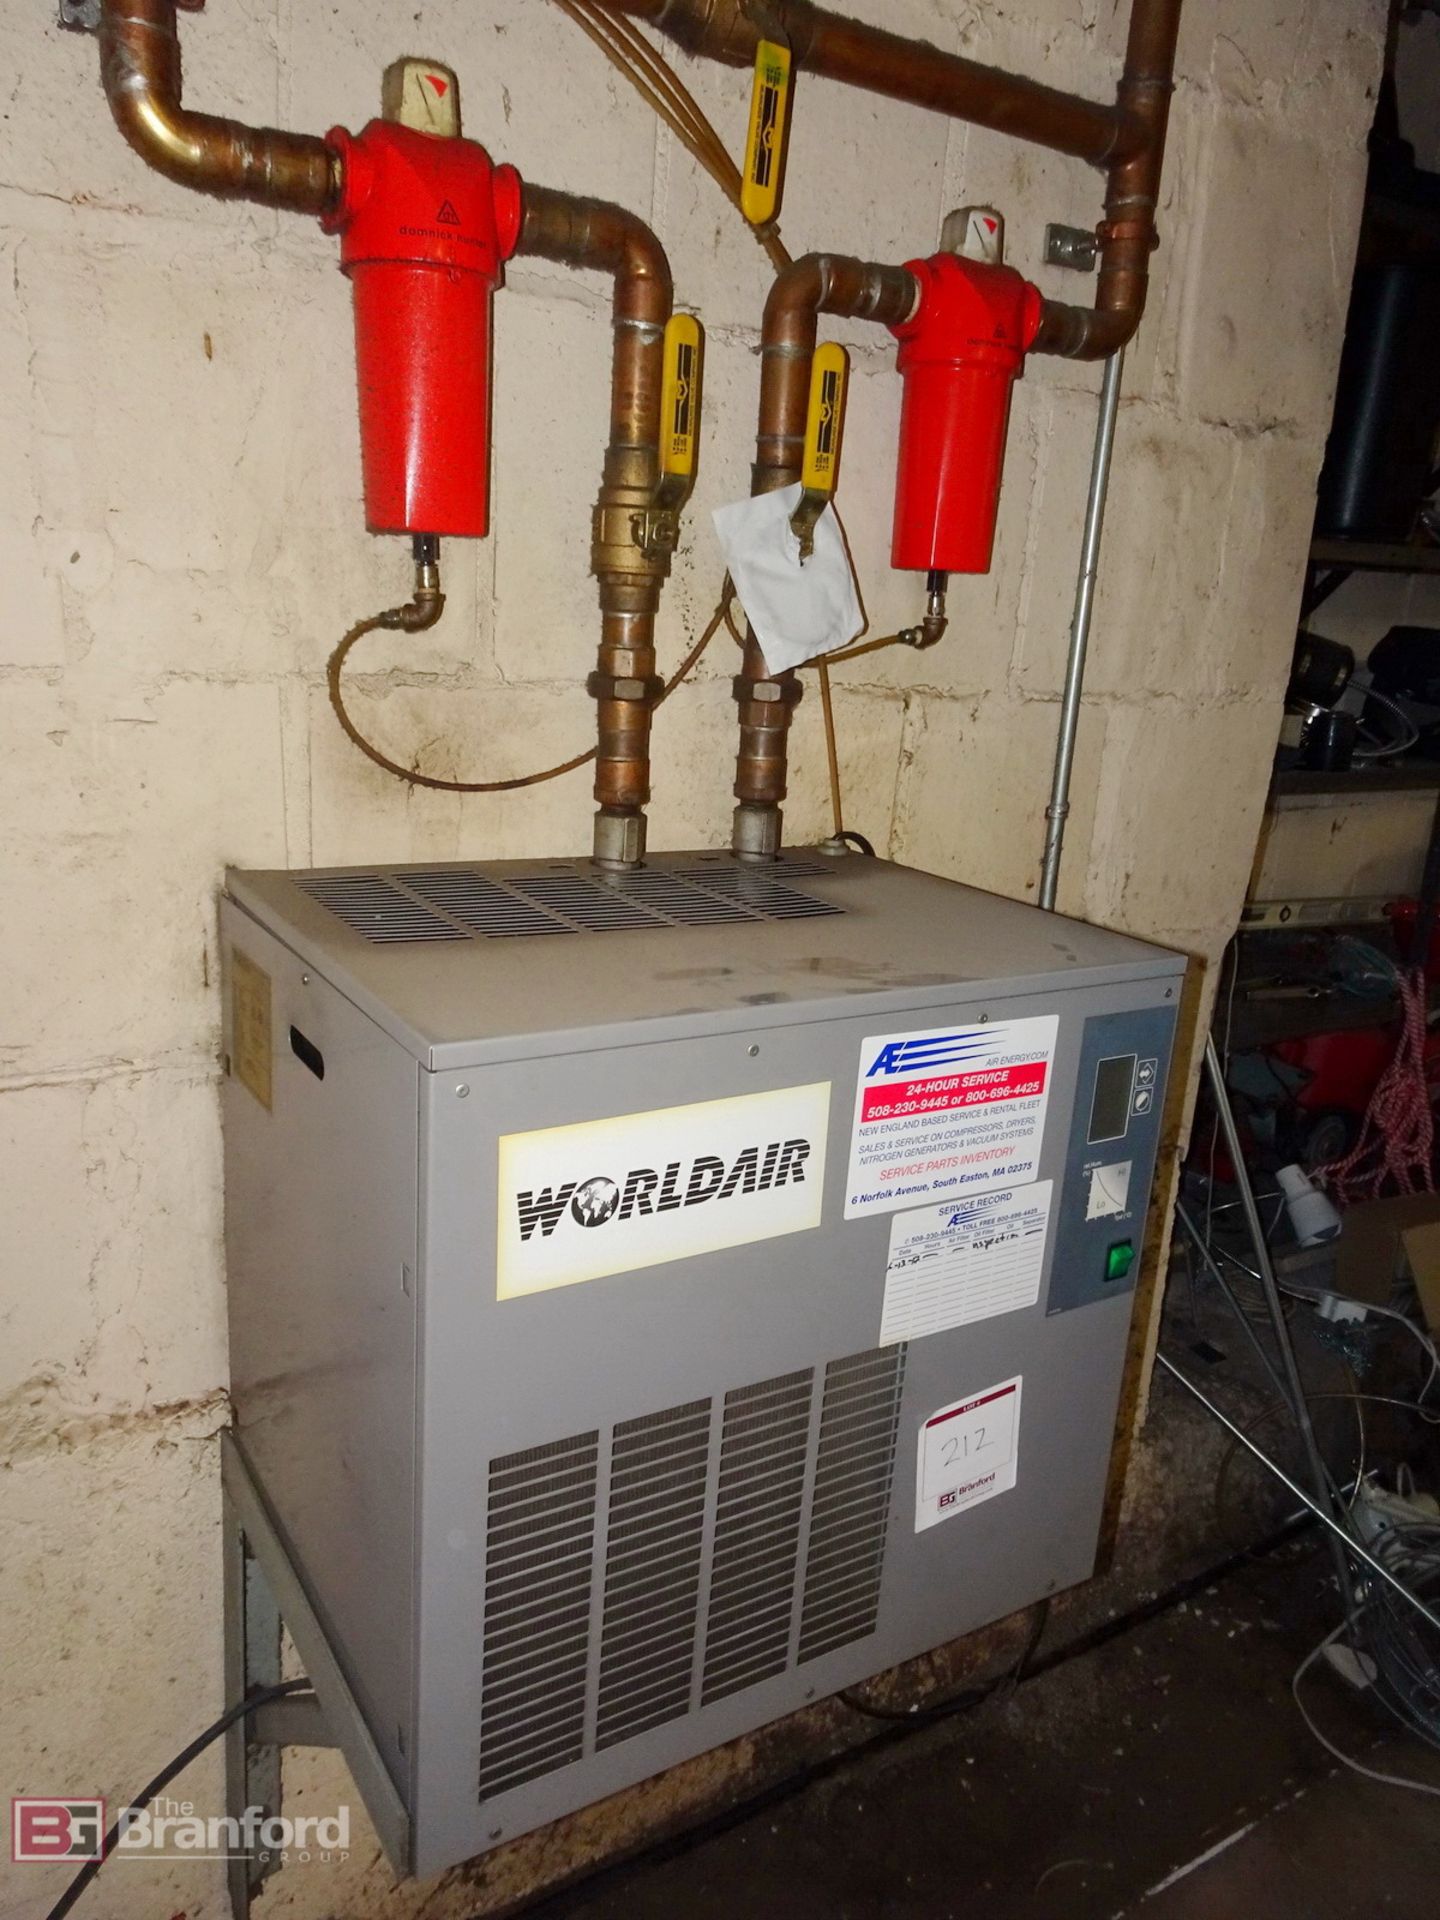 WorldAir Model WA0100C Type 775A Refrigerated Compressed Air Dryer - Image 2 of 3